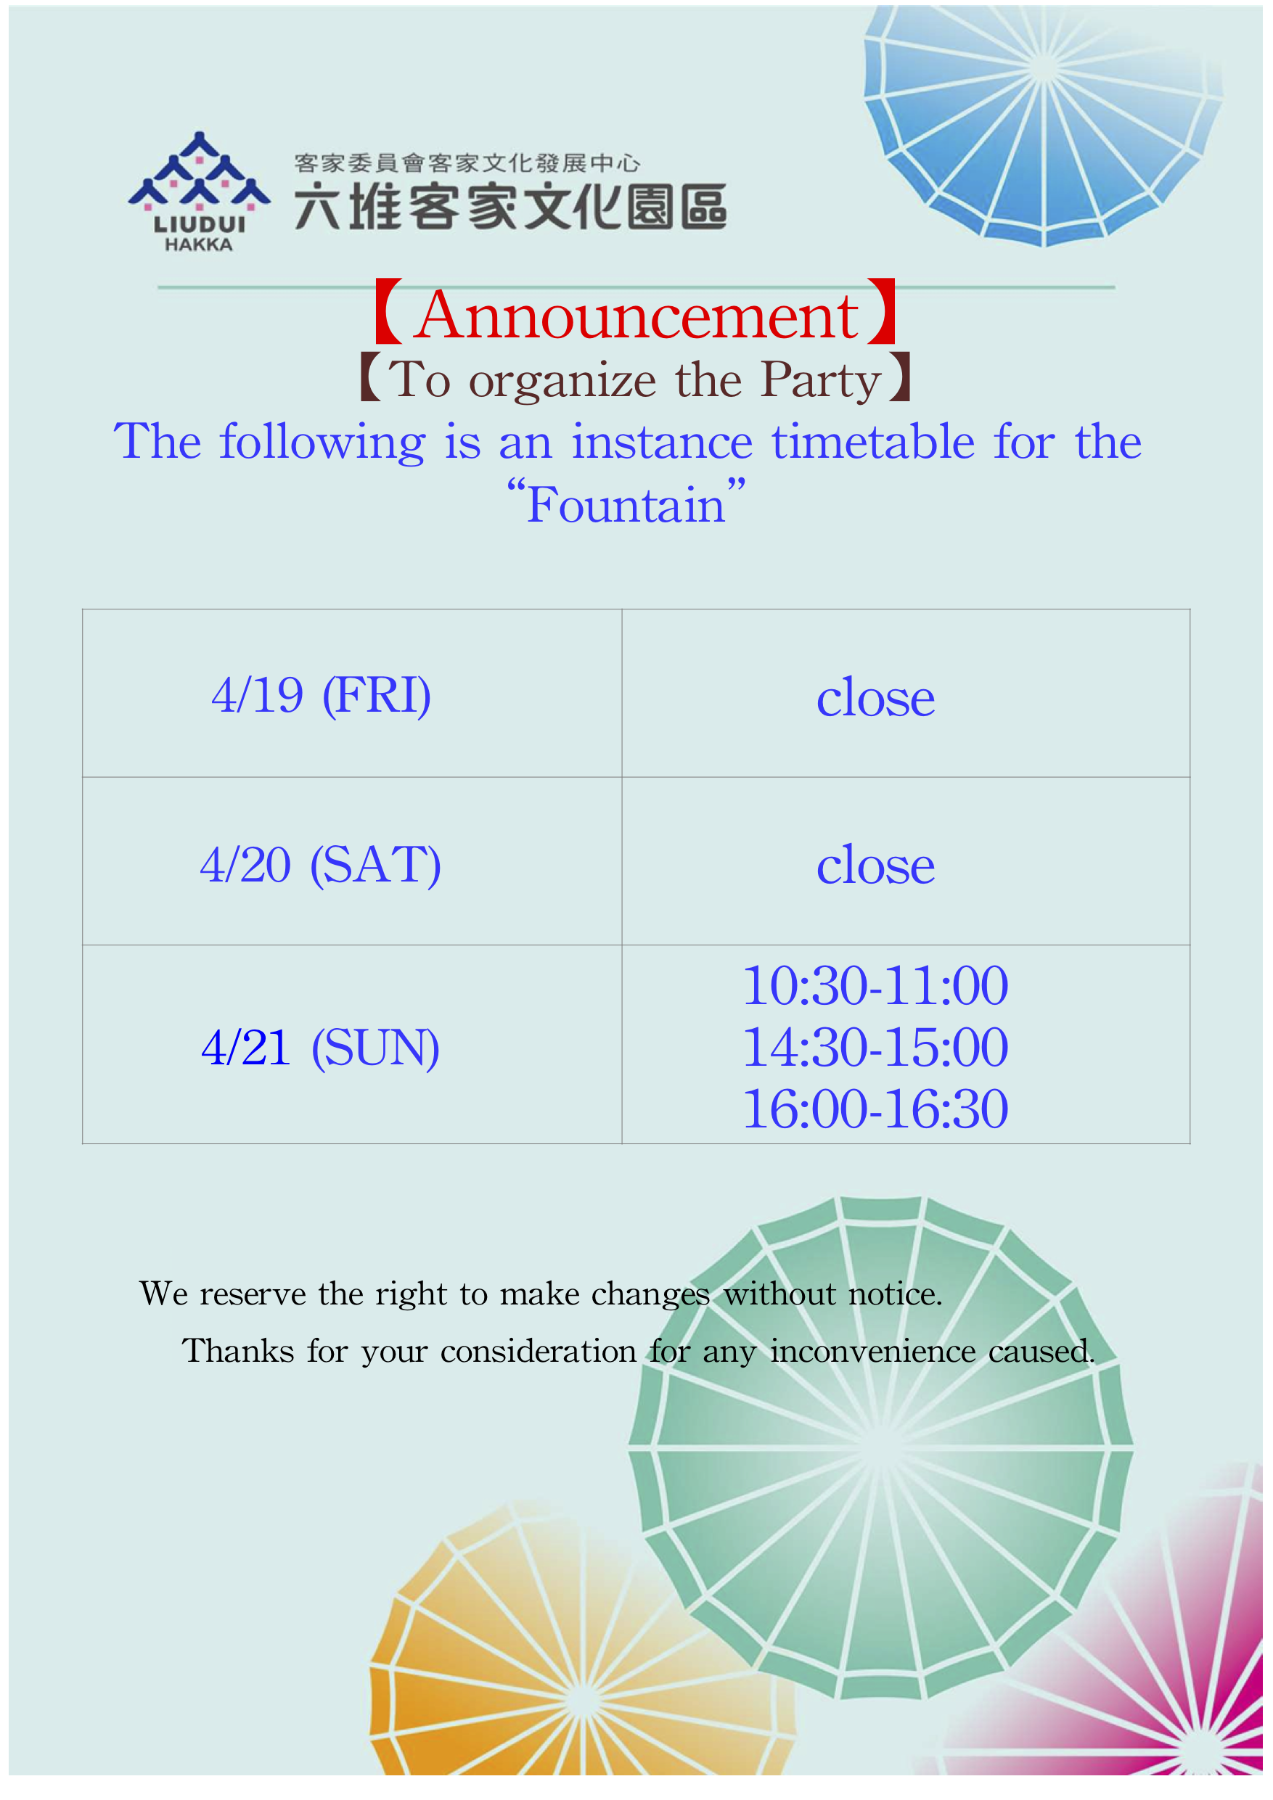 The following is an instance timetable for the Fountain